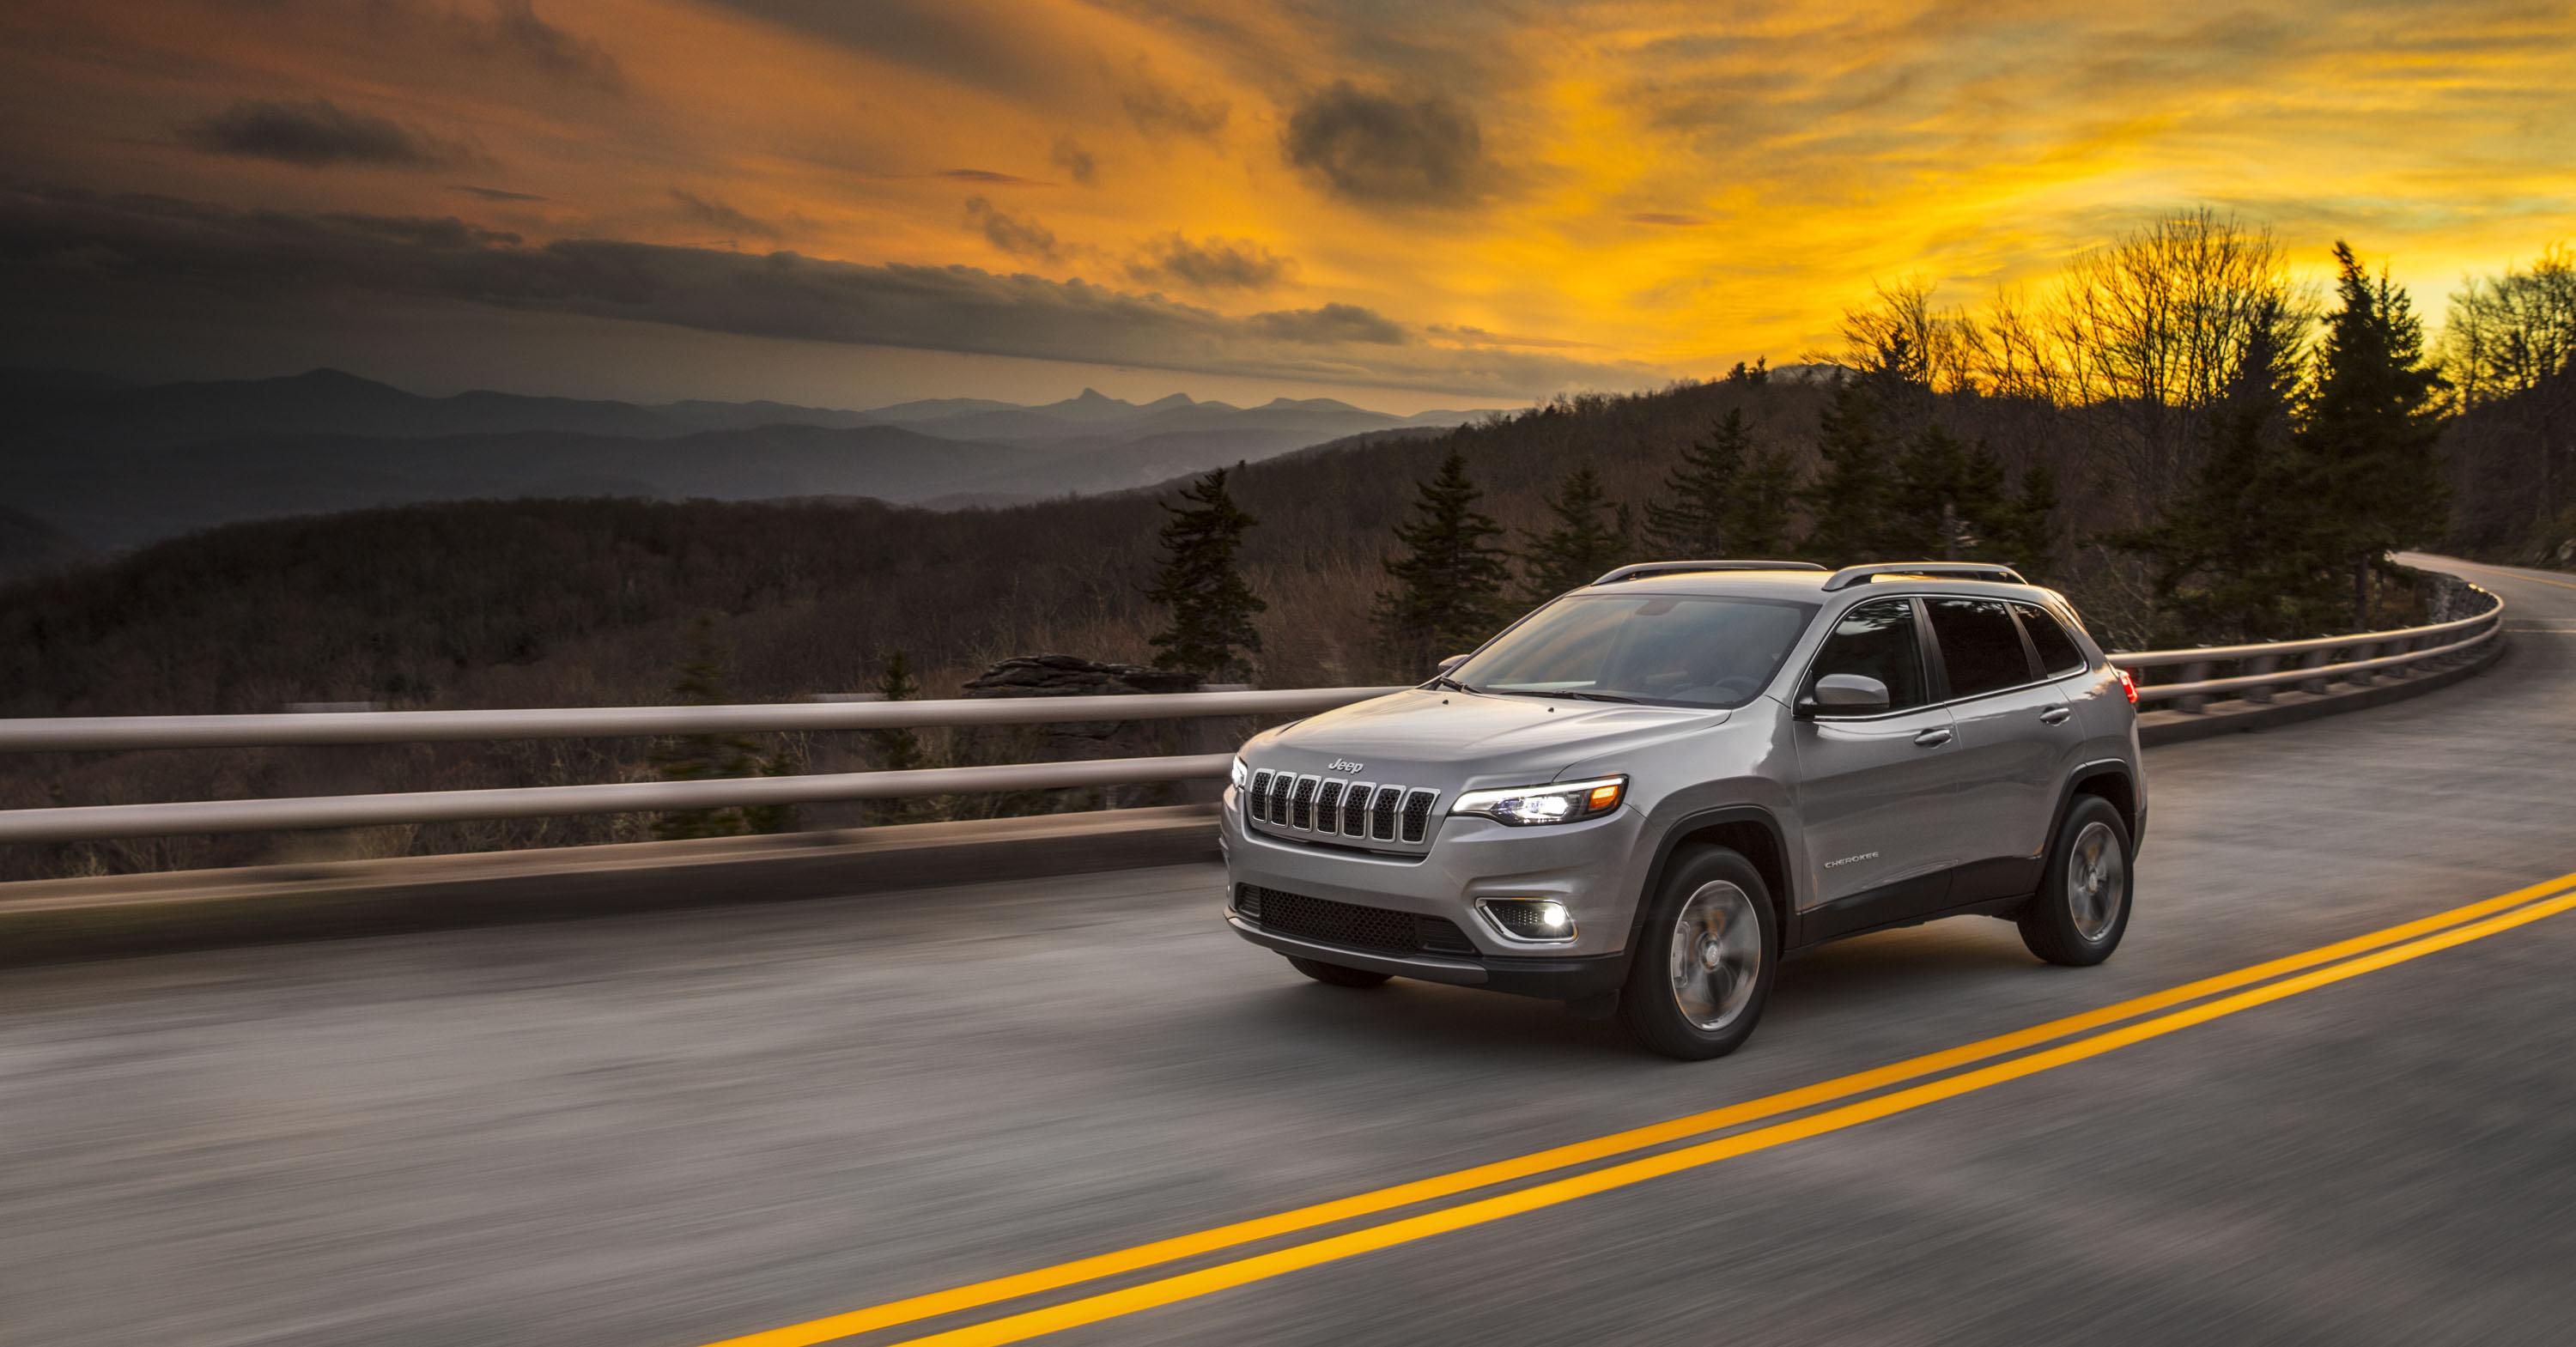 Jeep Cherokee Coming To Detroit Picture, Photo, Wallpaper